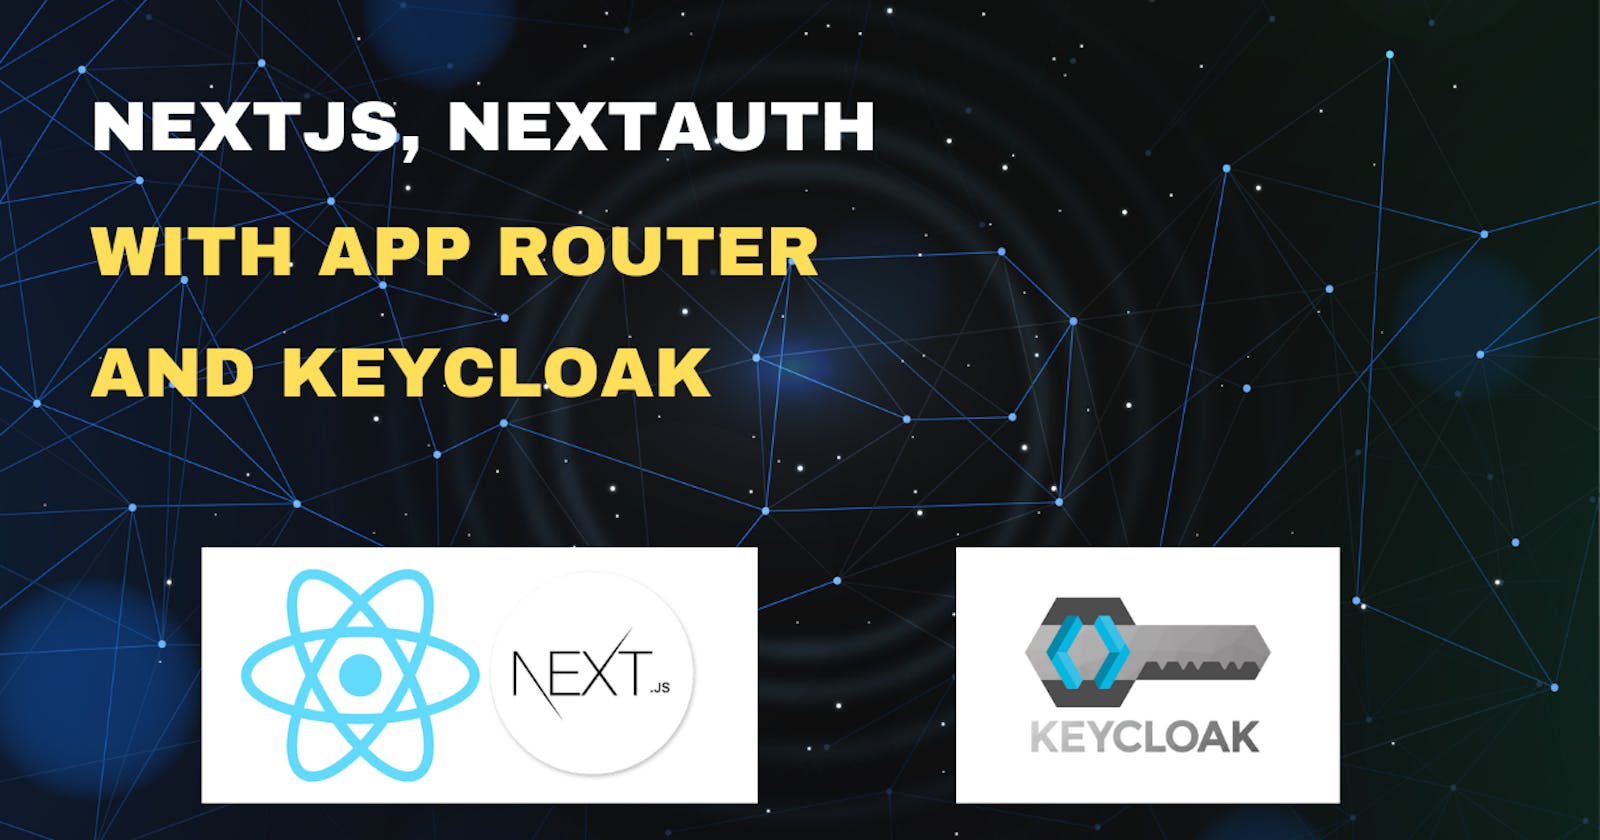 NextJS, NextAuth with App Router and Keycloak